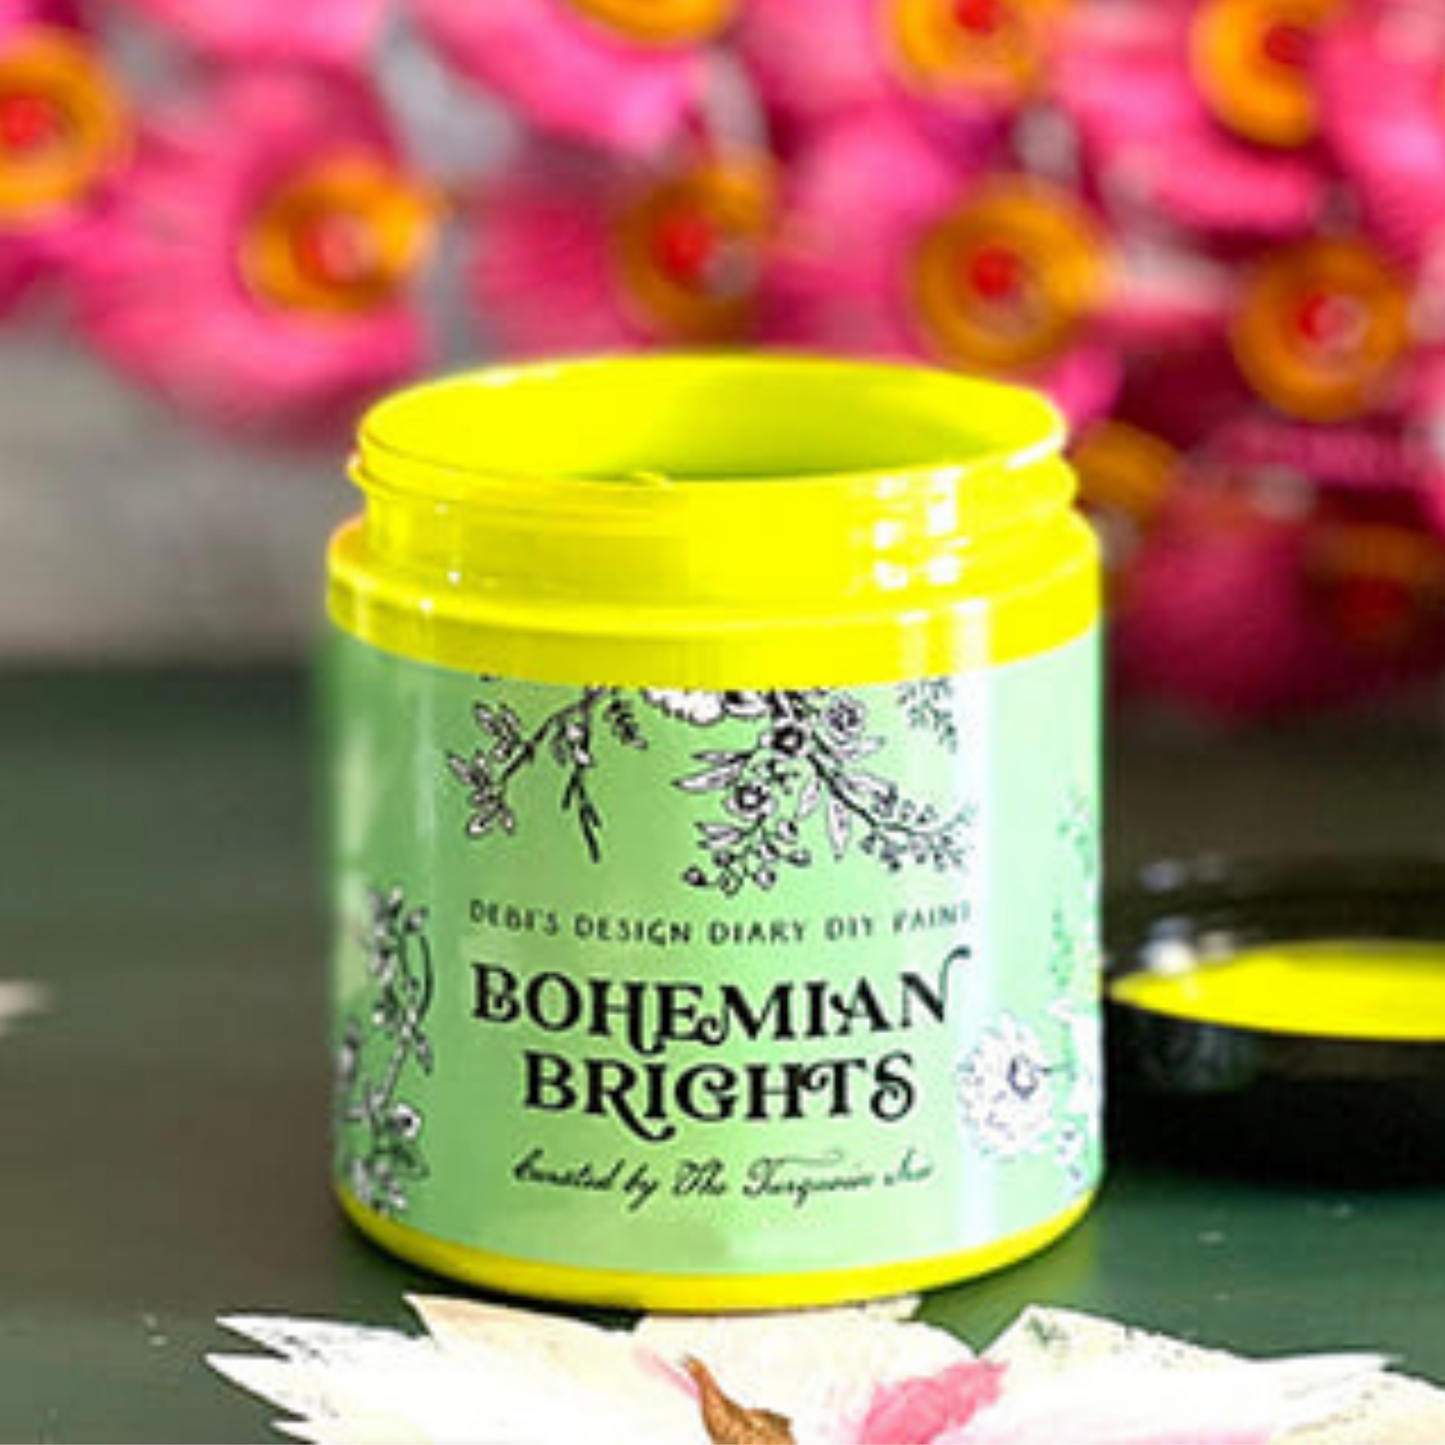 Color "Spirited" from the Bohemian Brights Collection by by Debi's Design Diary DIY Paint. 4 oz. jar available at Milton's Daughter. Curated by Dionne Woods of the Turquoise Iris.